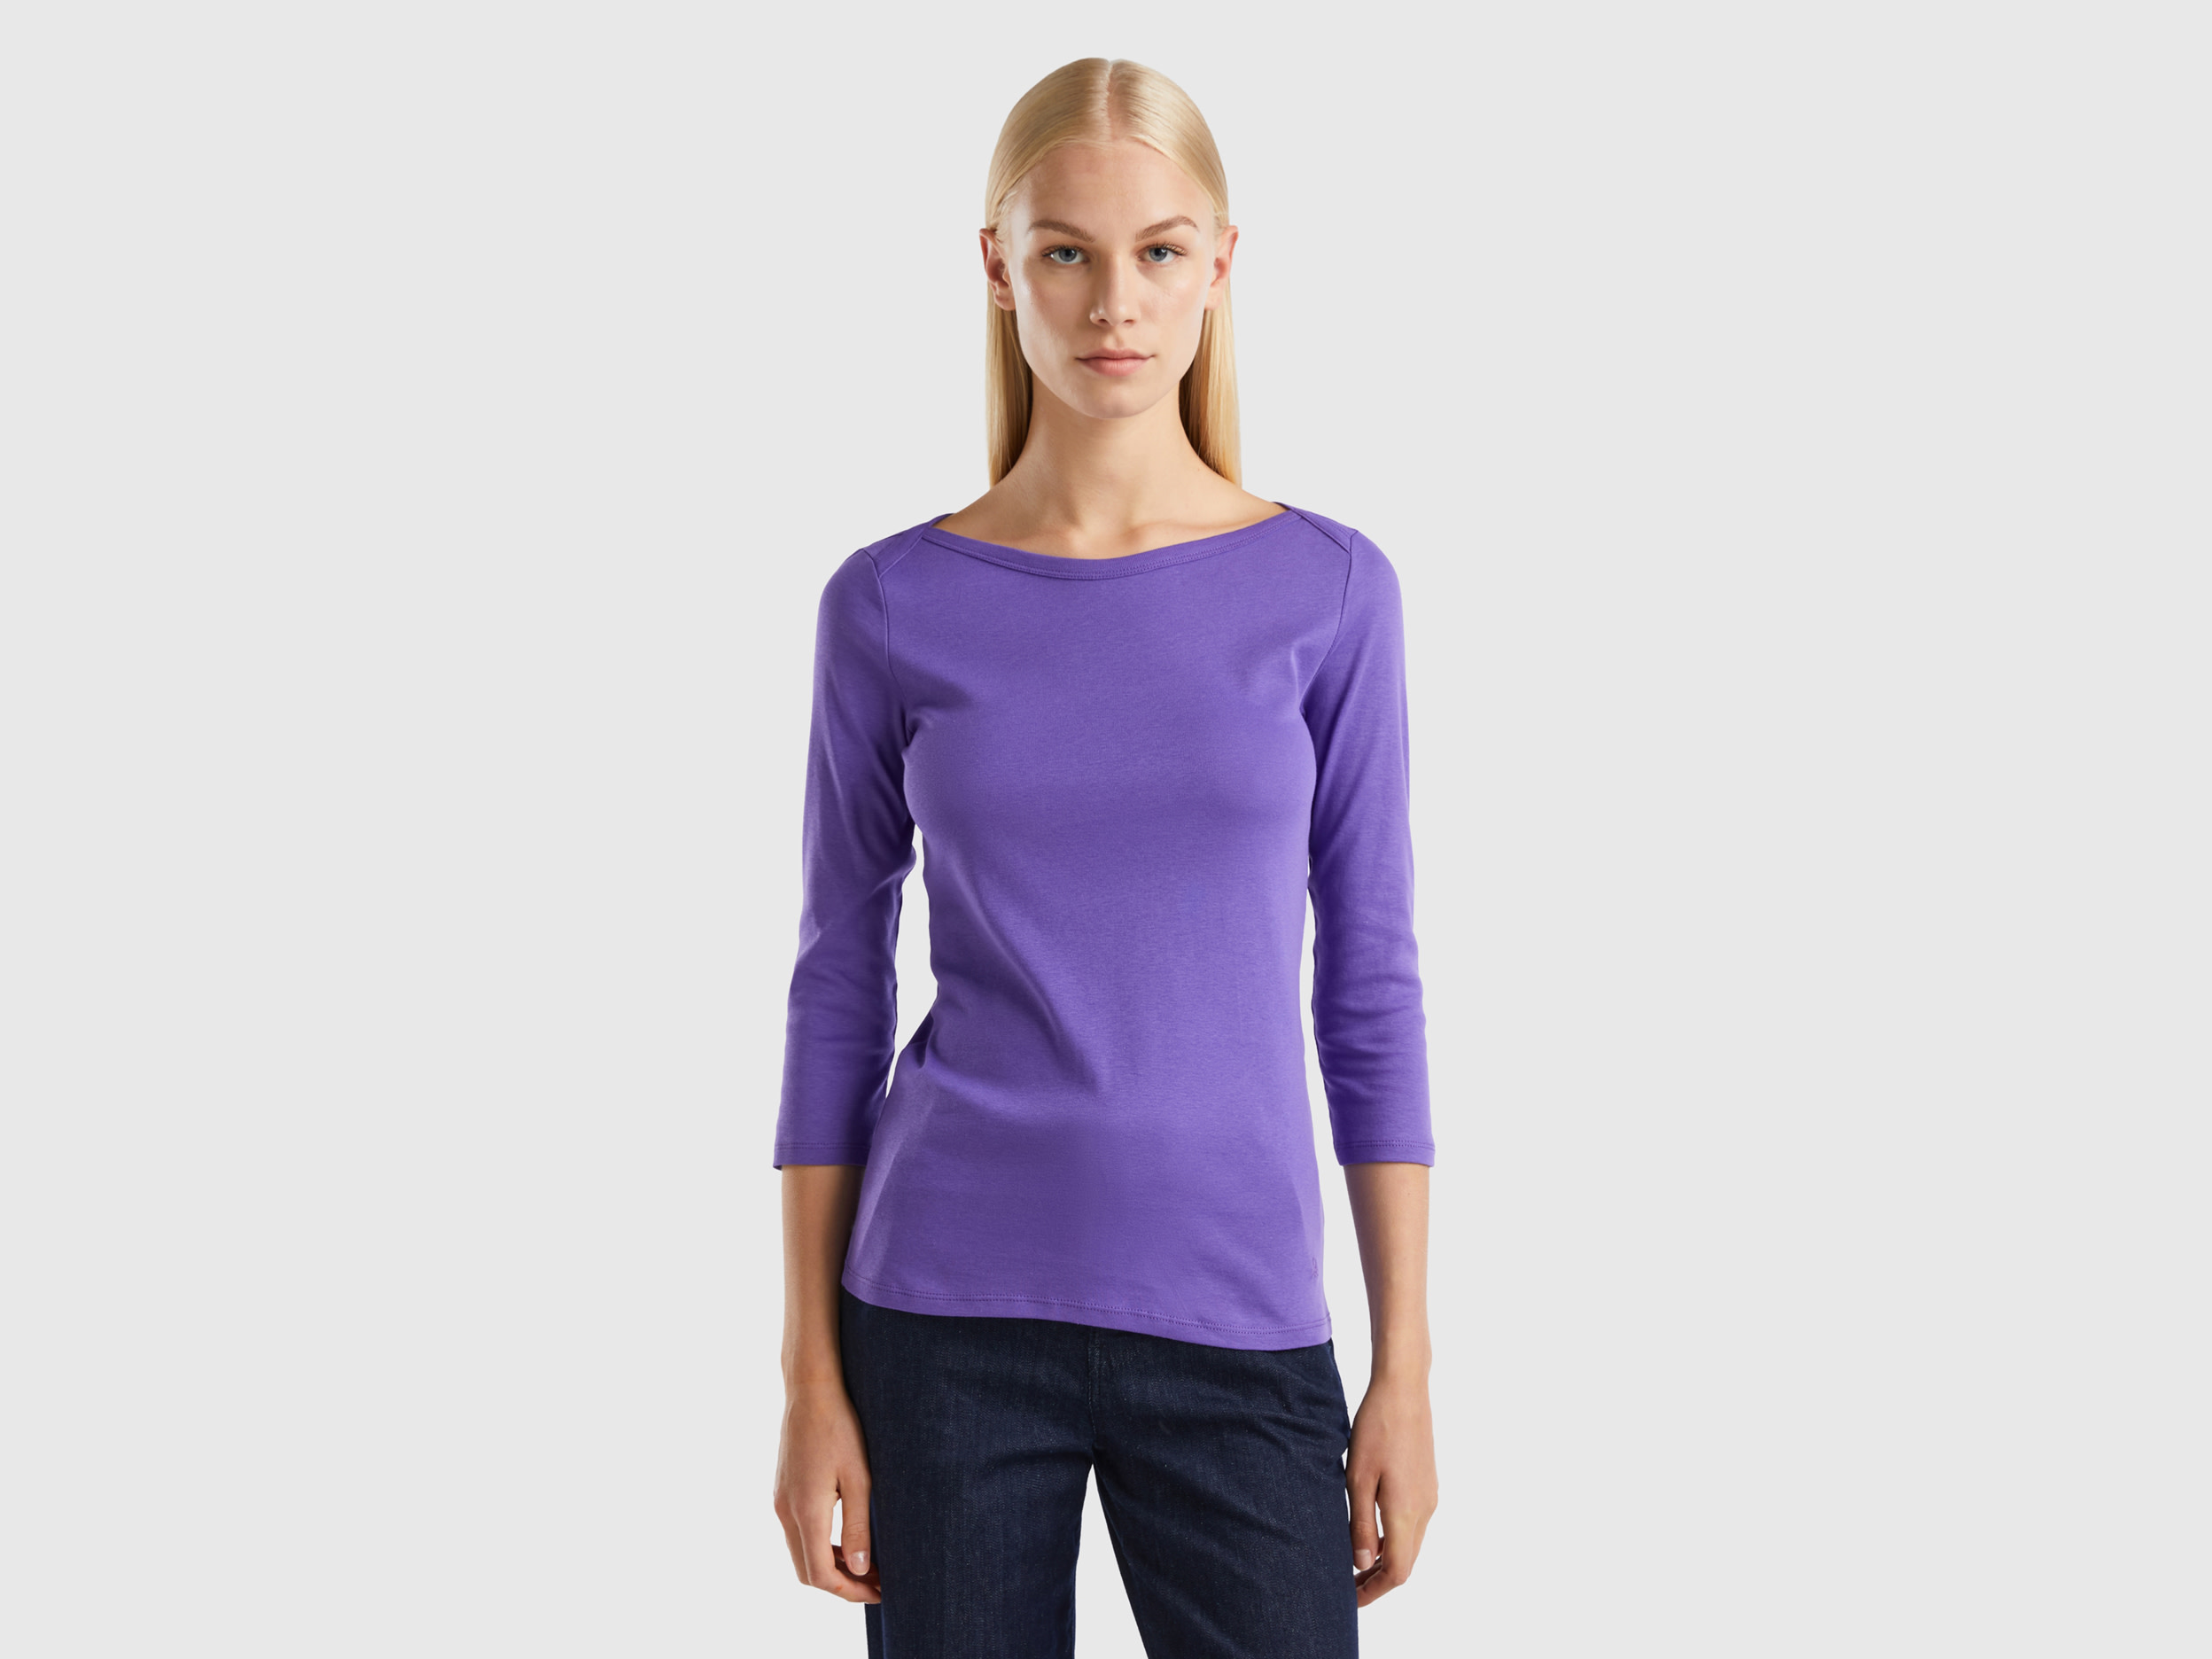 Benetton, T-shirt With Boat Neck In 100% Cotton, size S, Violet, Women